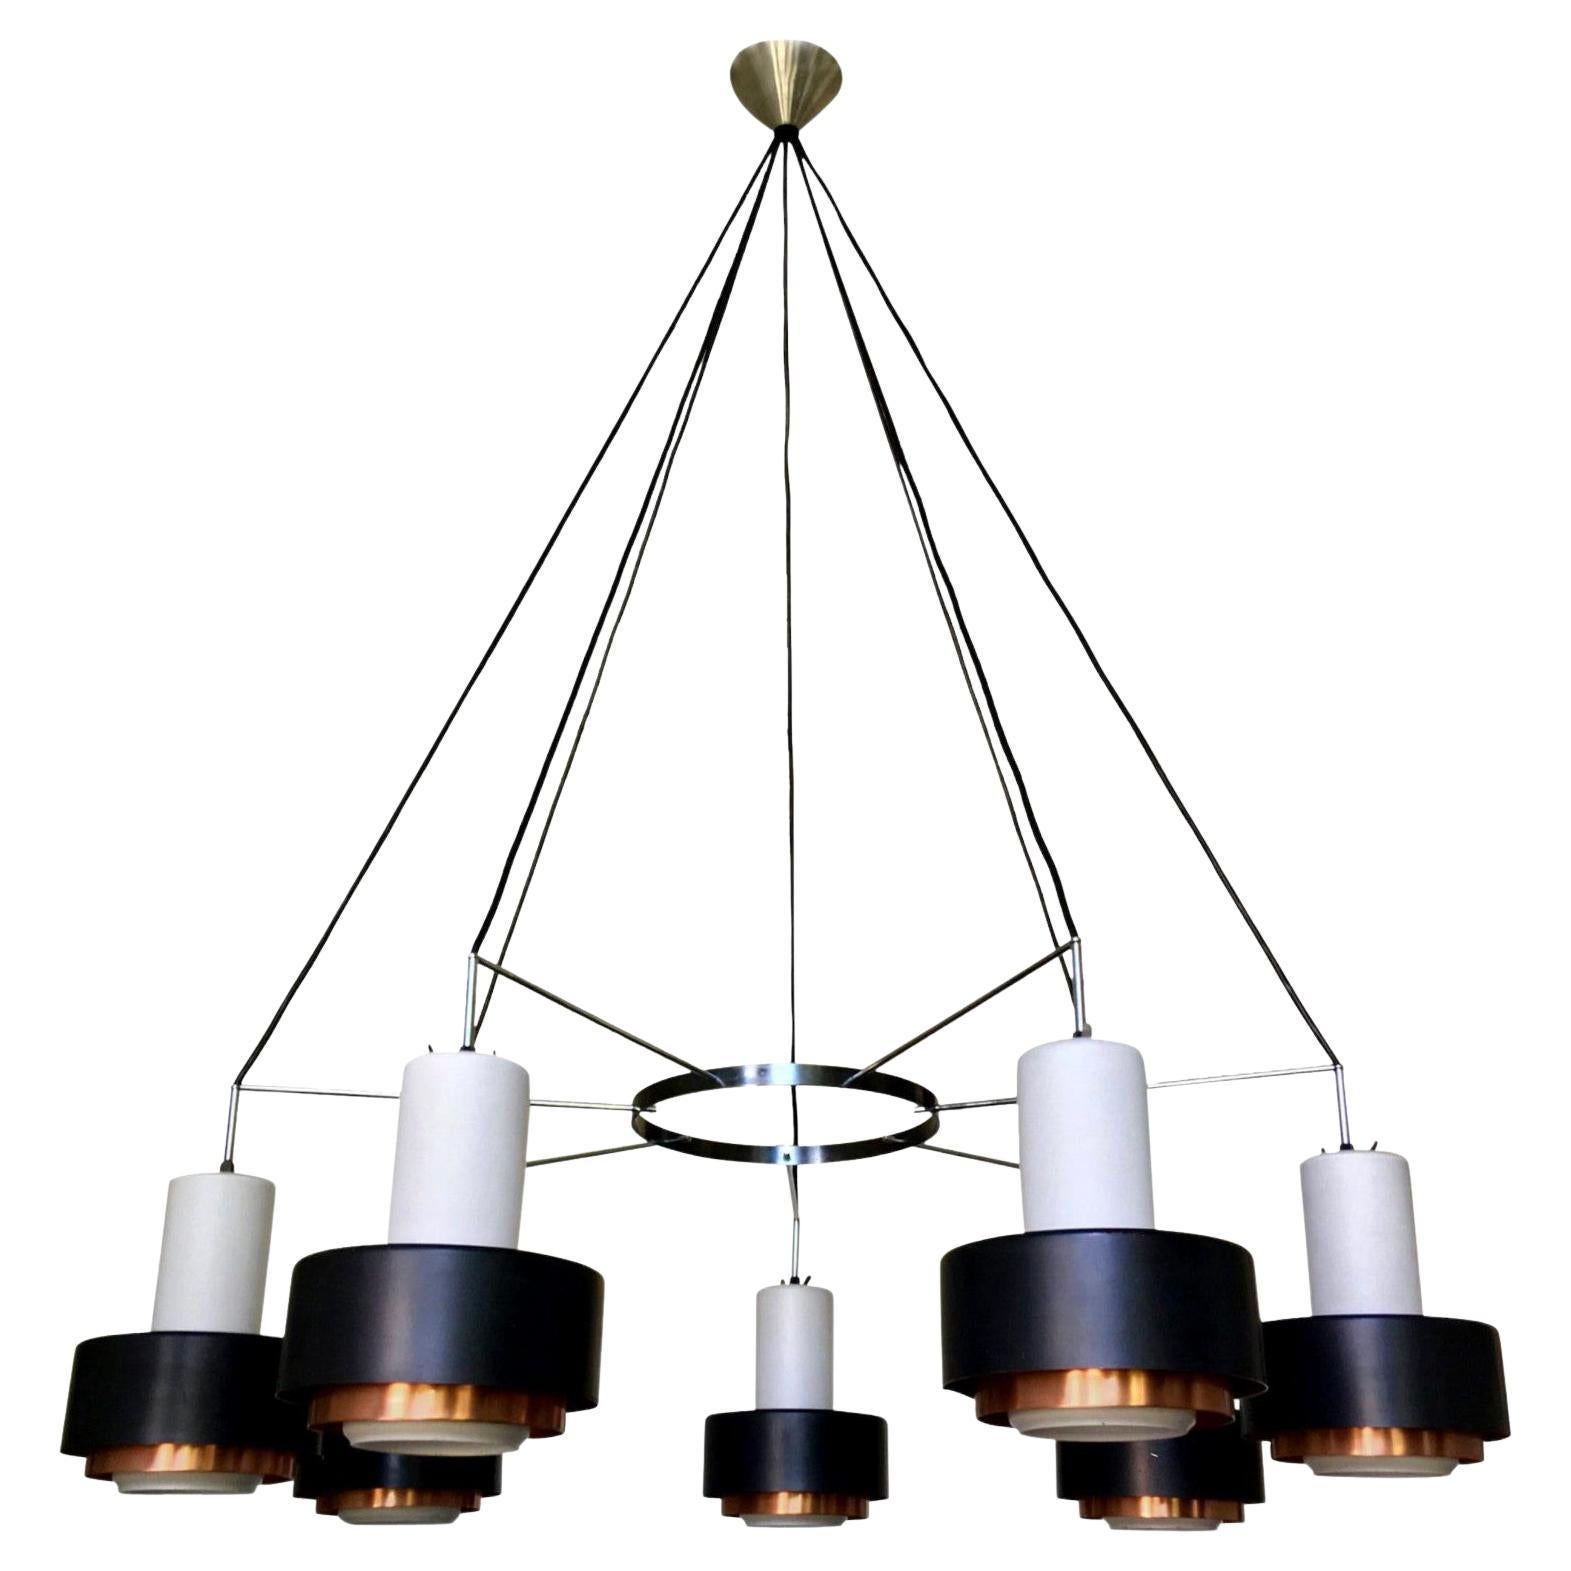 Large Mid-Century Modern Chandelier with White Glass, Black and Copper Shades